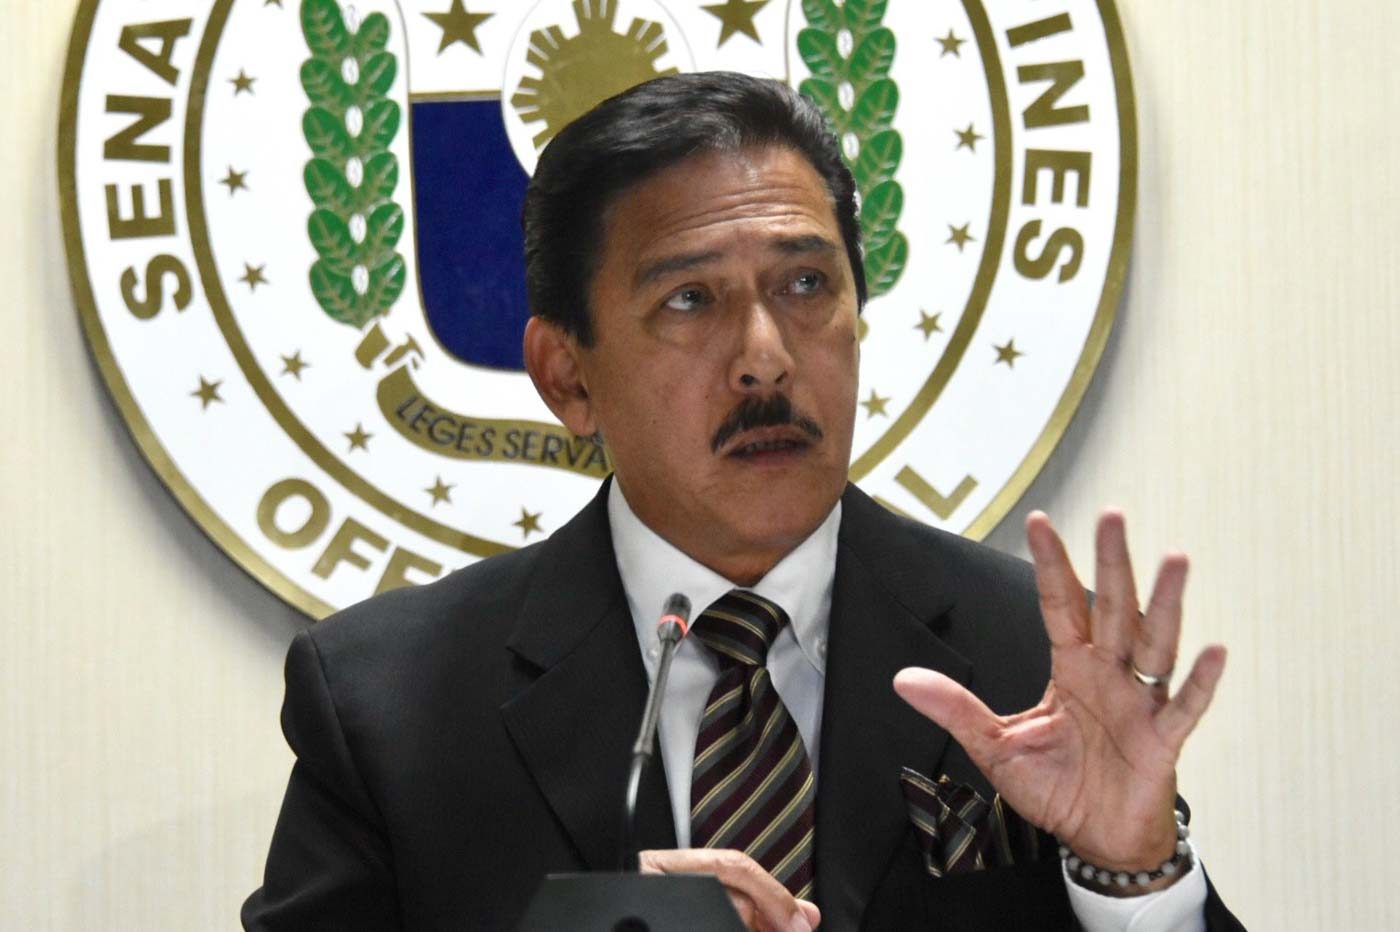 Amid joint exploration talks, Sotto says China now ‘recognizes West PH Sea is ours’